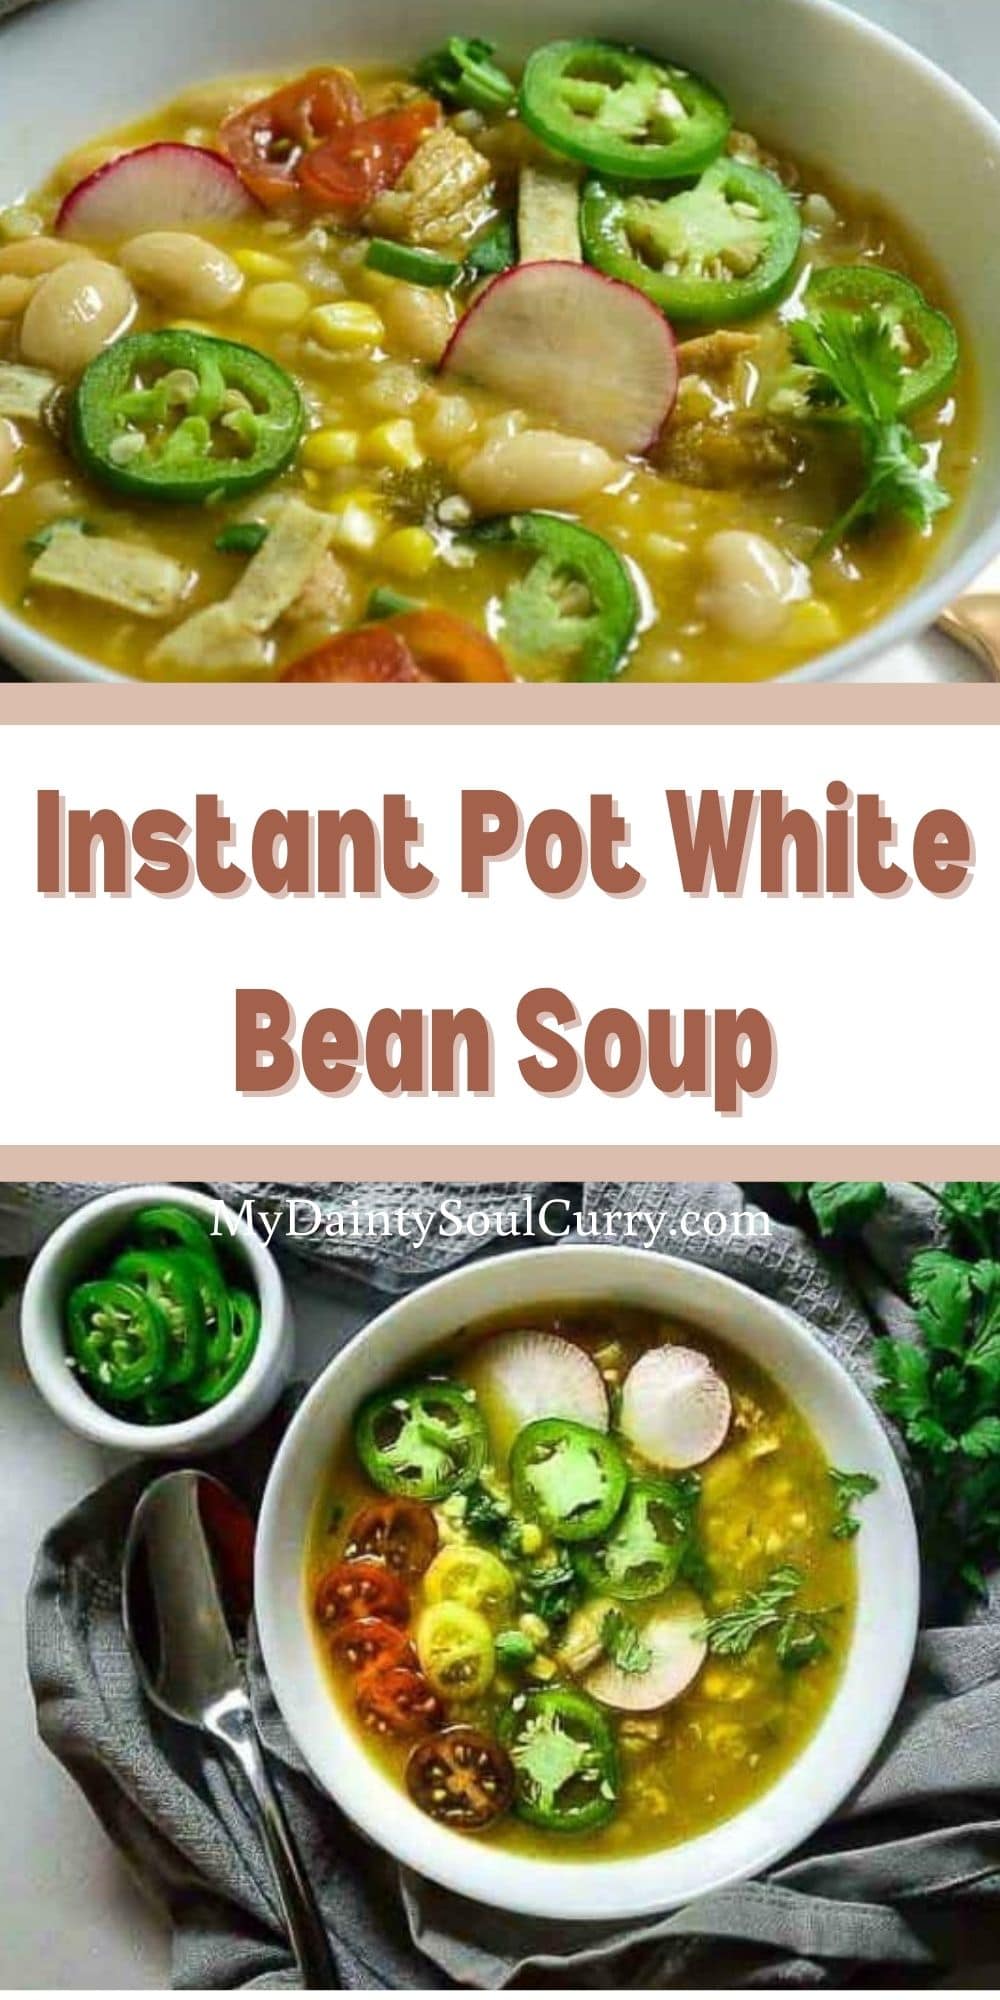 Instant Pot White Bean Soup - My Dainty Soul Curry